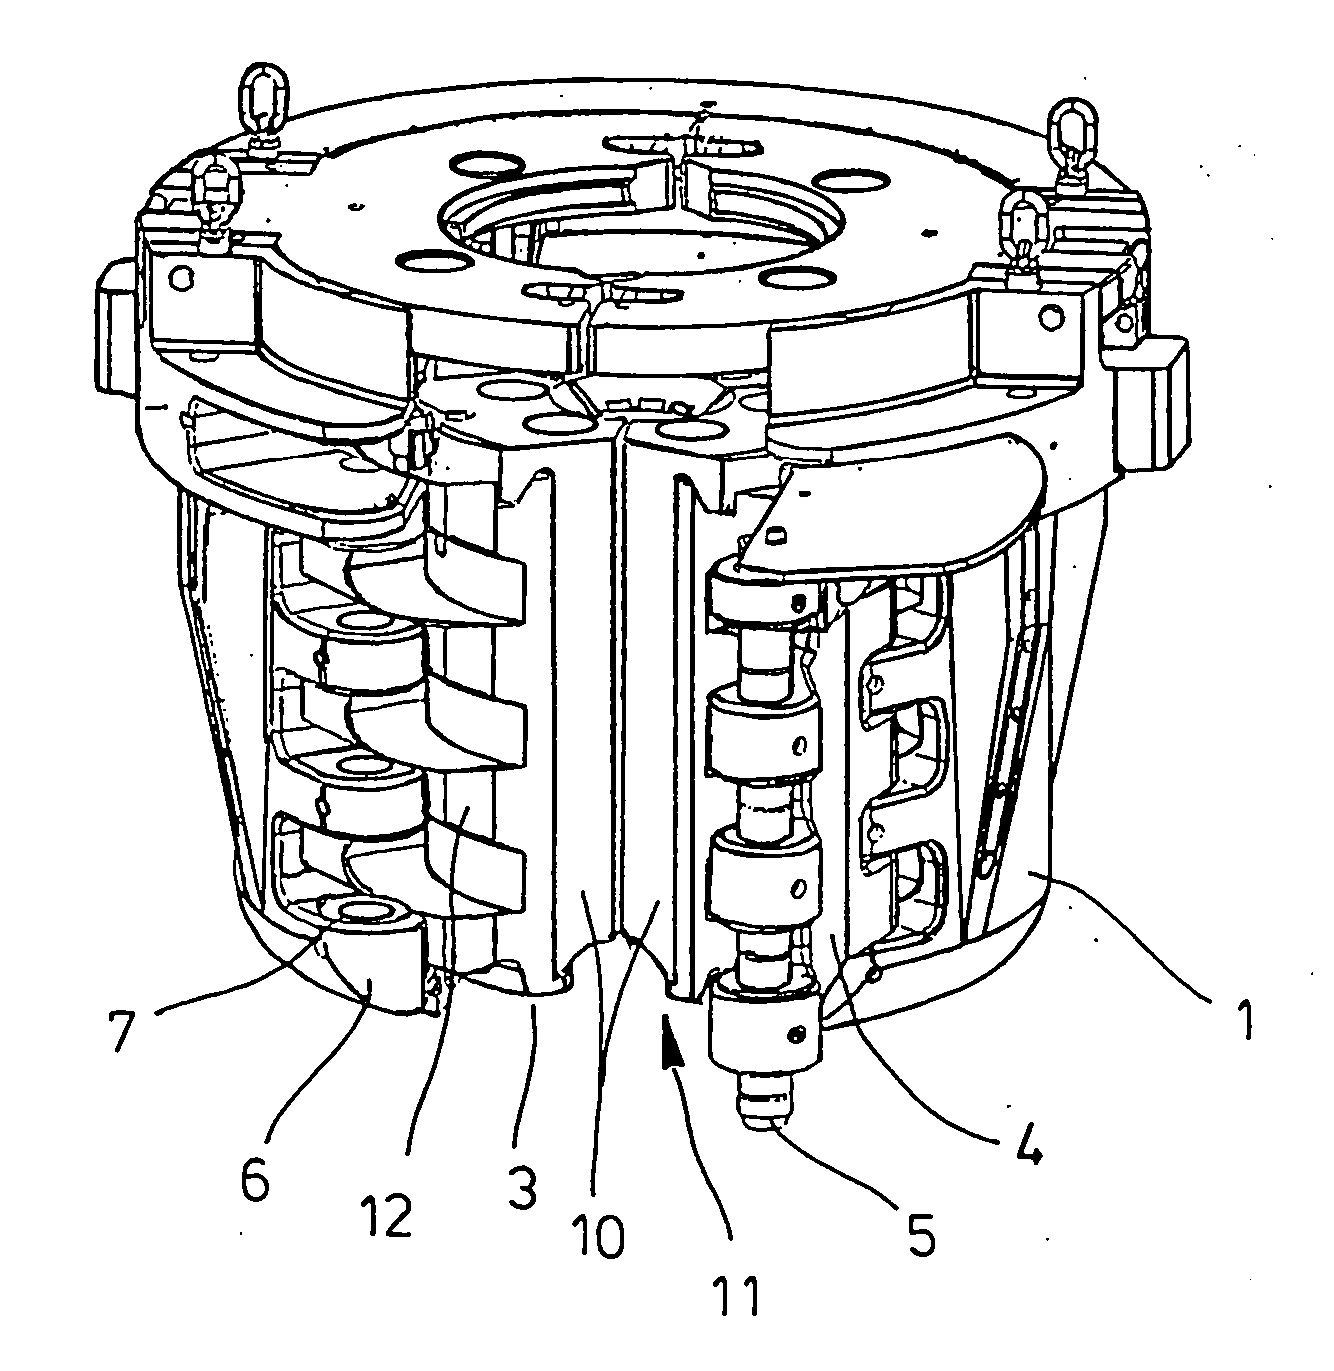 Apparatus for vertically supporting pipes